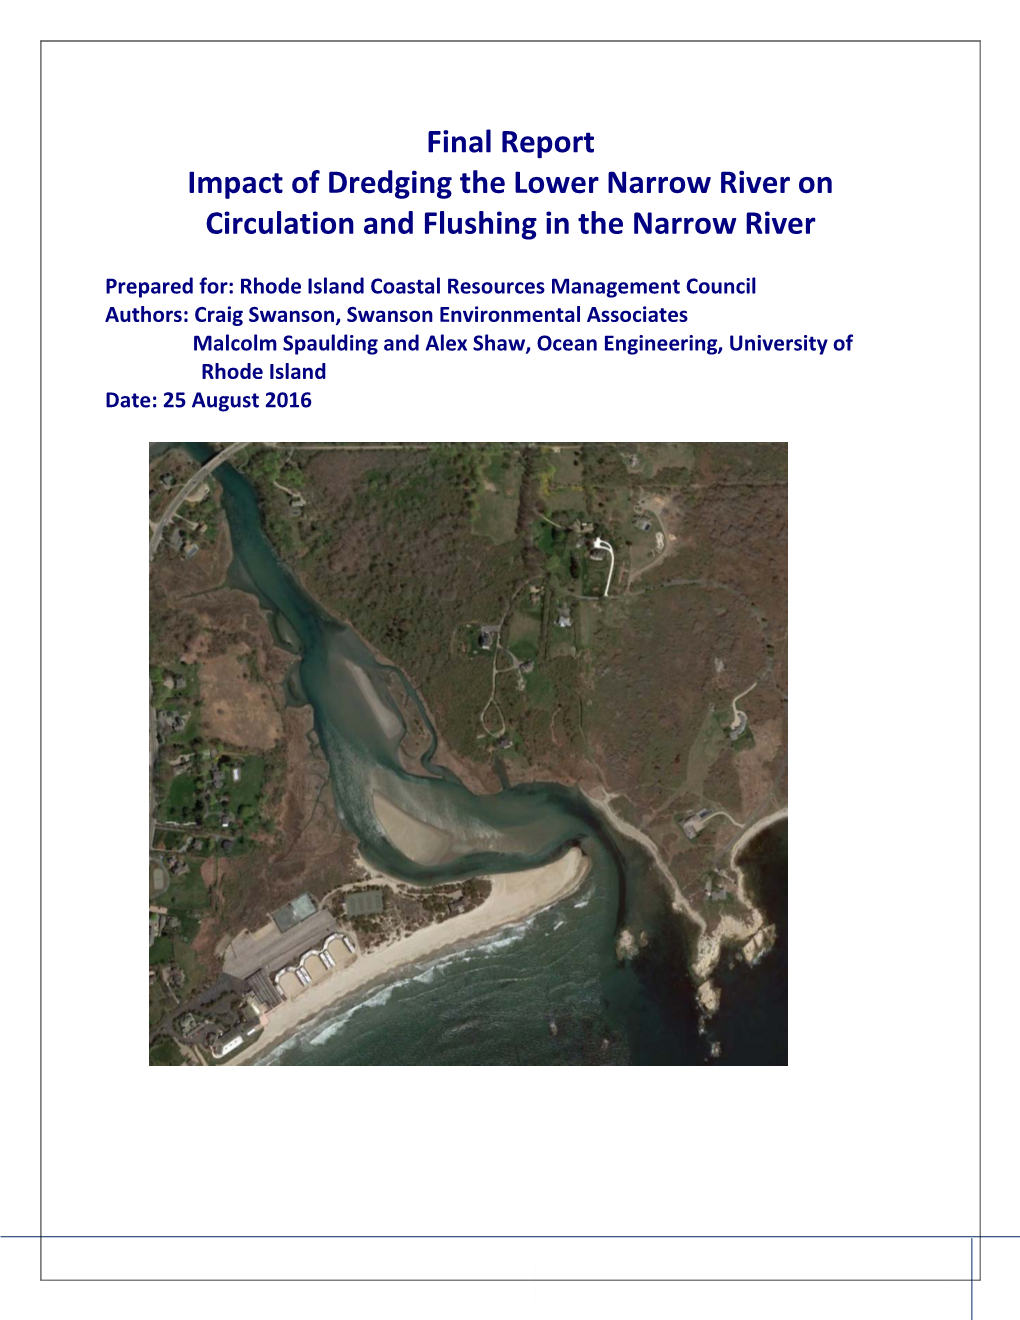 Impact of Dredging the Lower Narrow River on Circulation and Flushing in the Narrow River